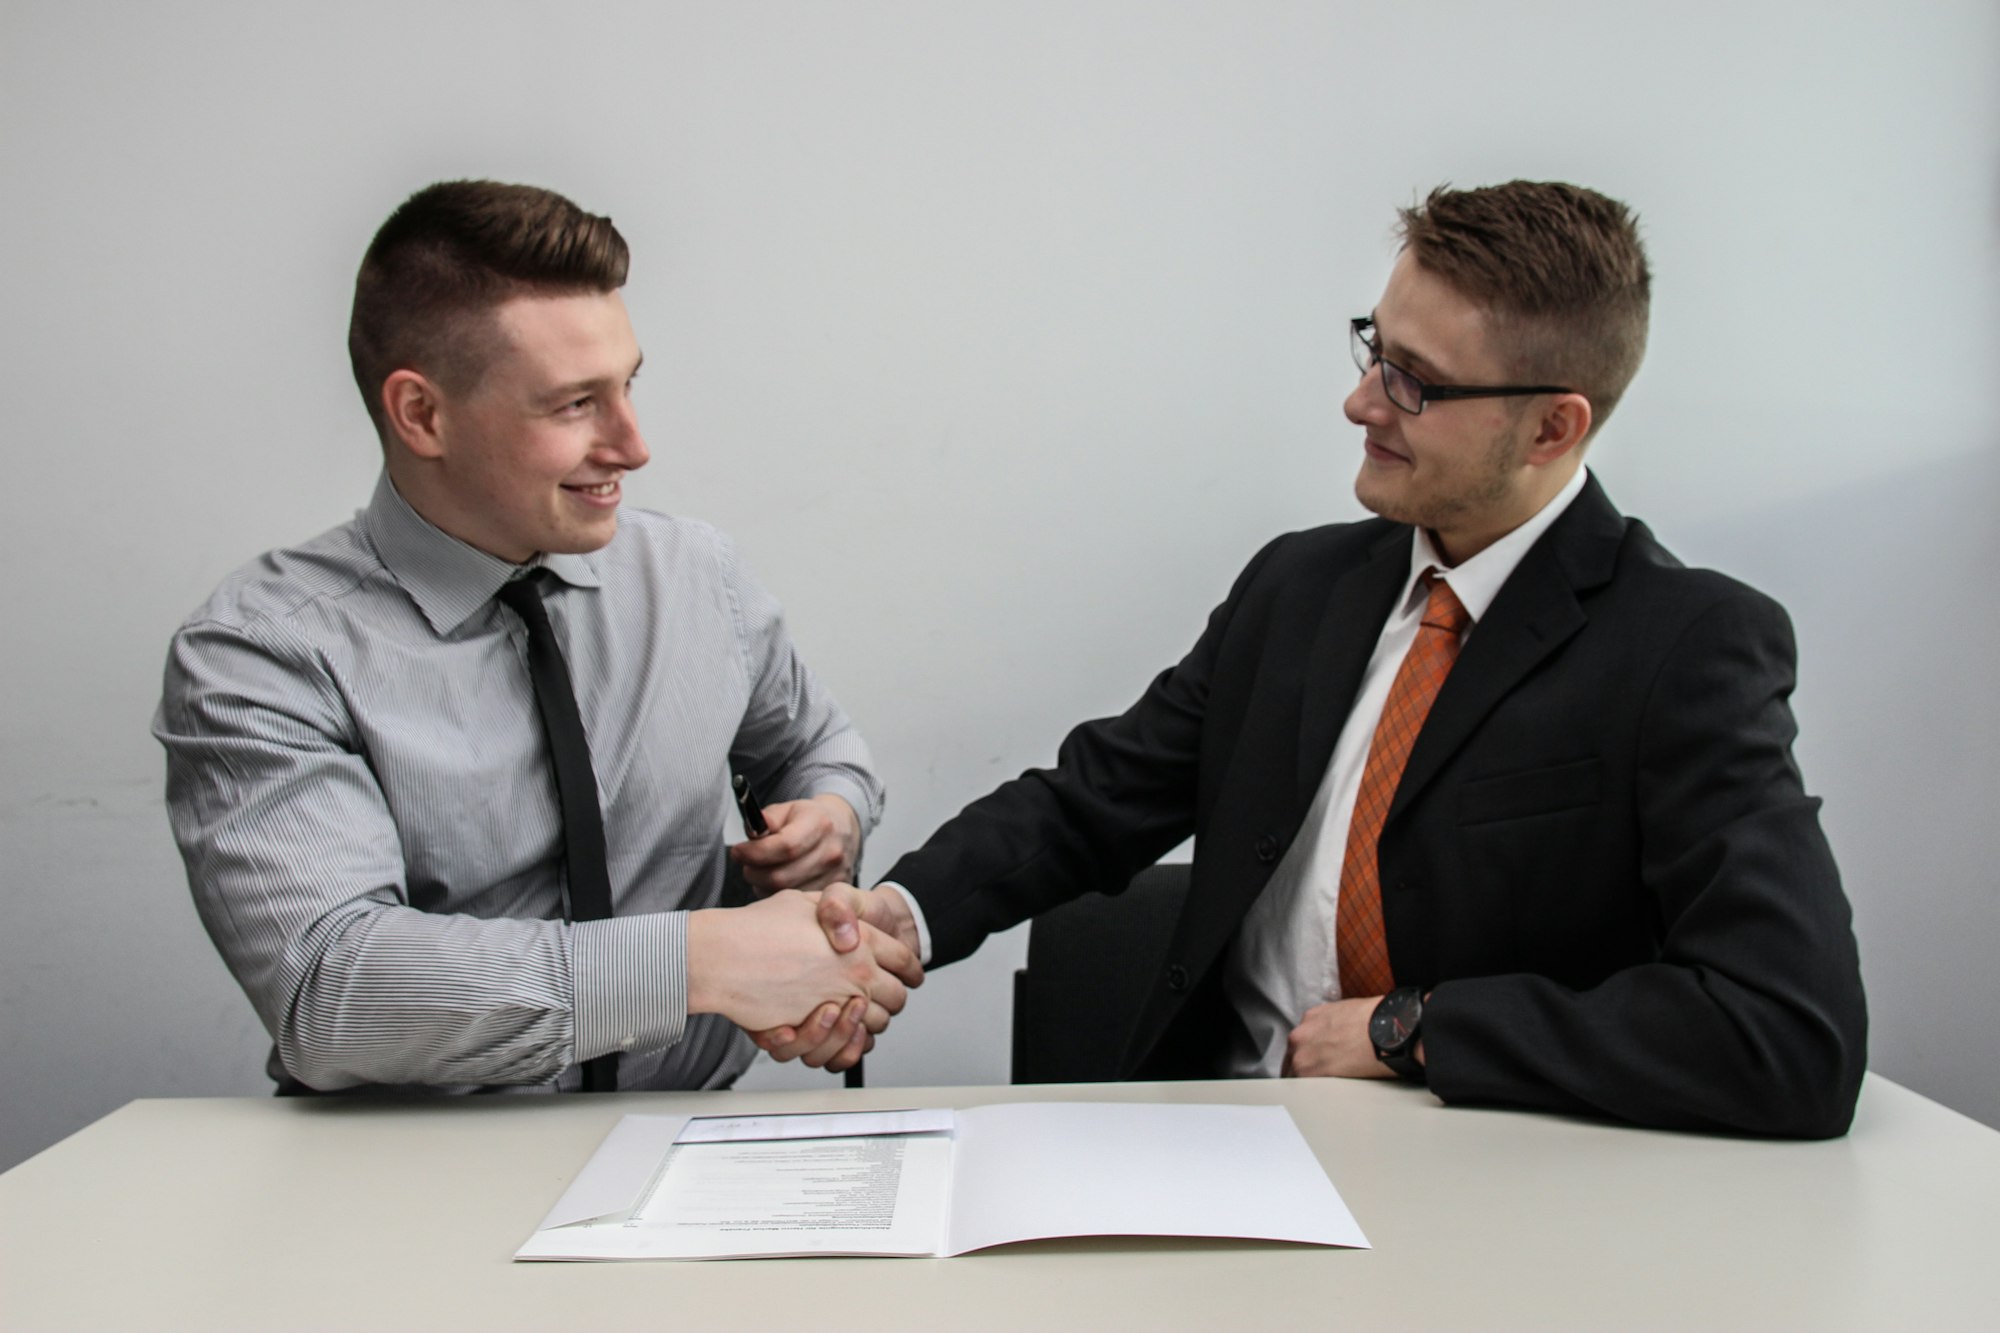 Two men face each other and shake hands after a job interview.